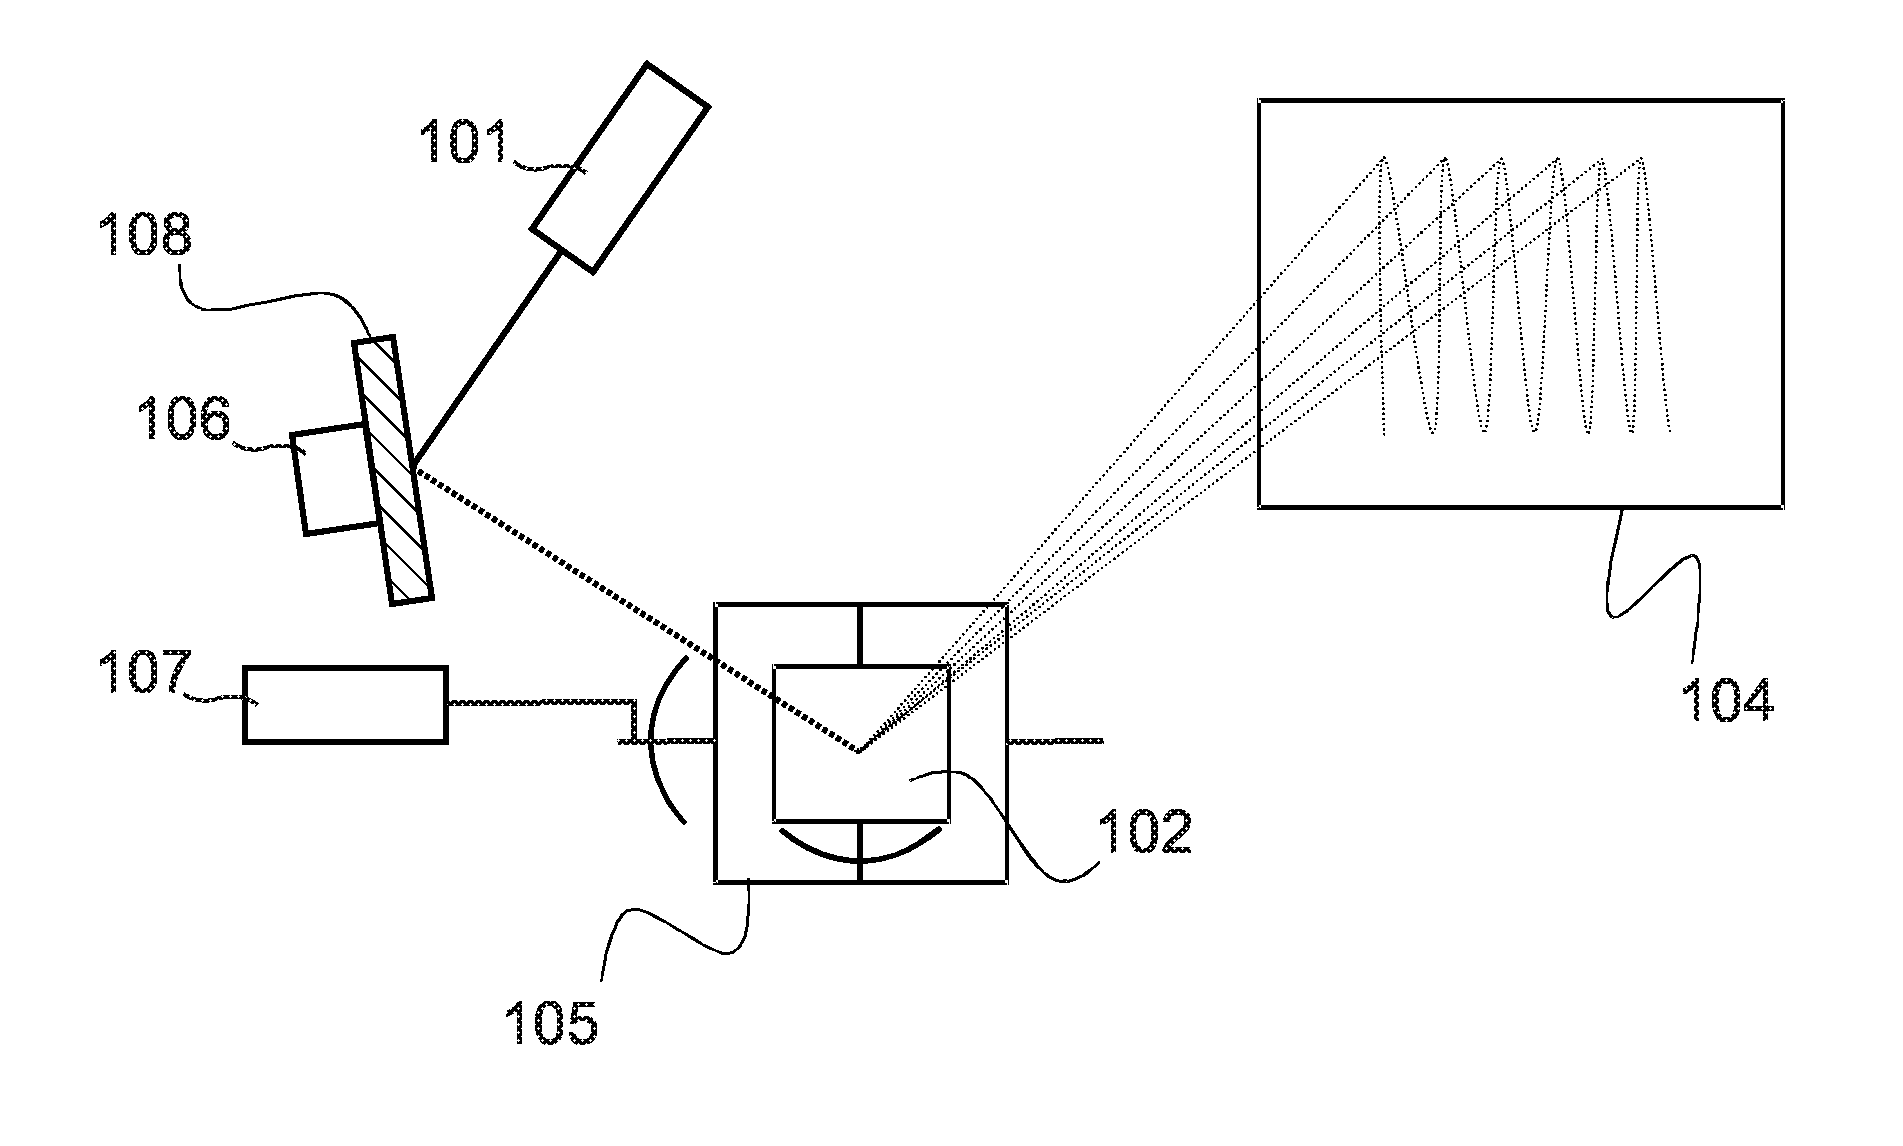 Micro-projection device with antispeckle vibration mode